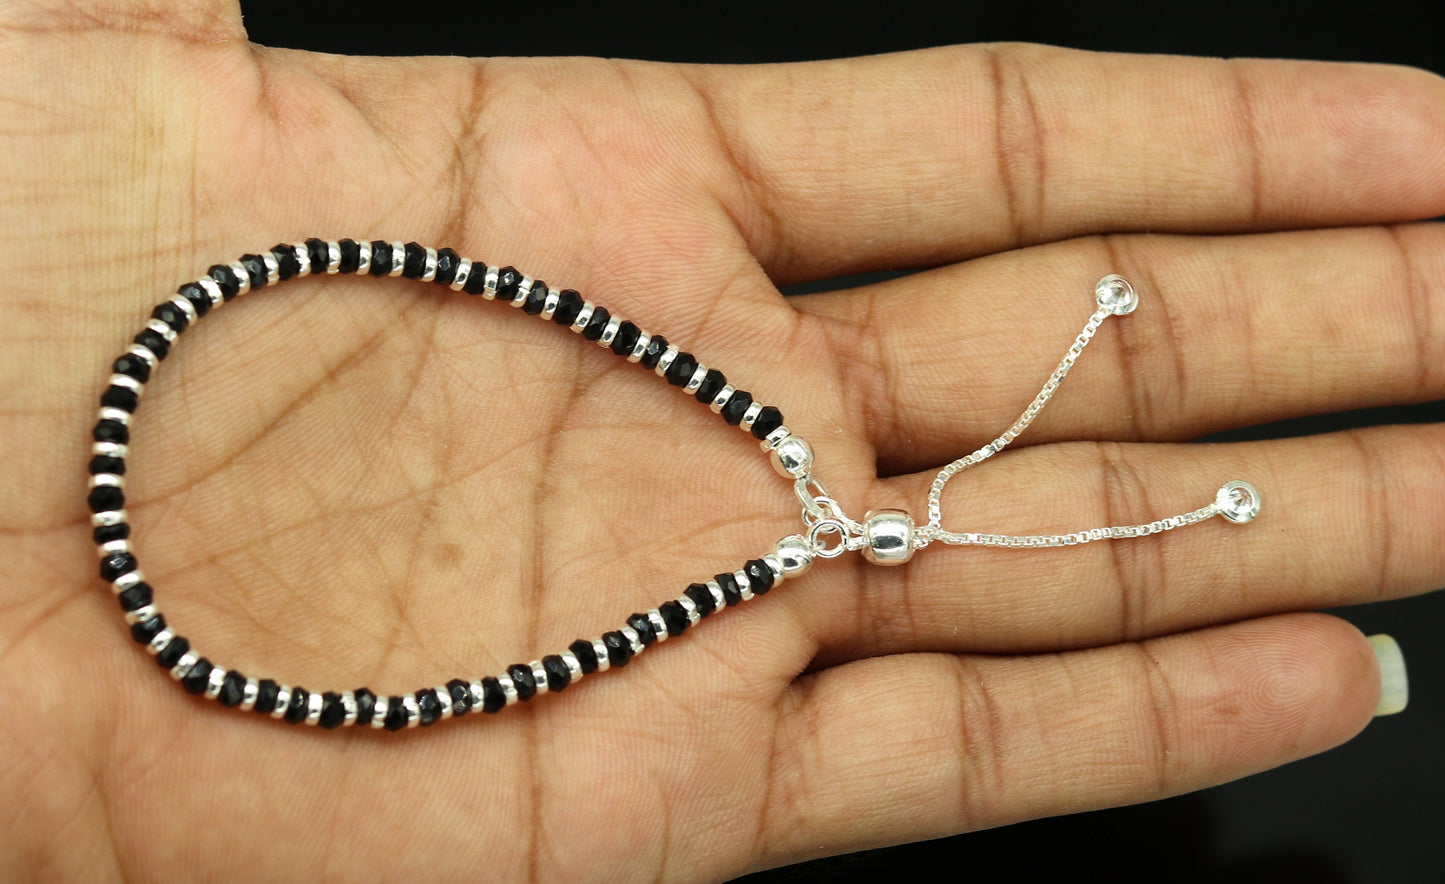 7 inches long handmade 925 sterling silver fabulous silver beads, black stone charm adjustable customized bracelet for girl's gifting sbr171 - TRIBAL ORNAMENTS